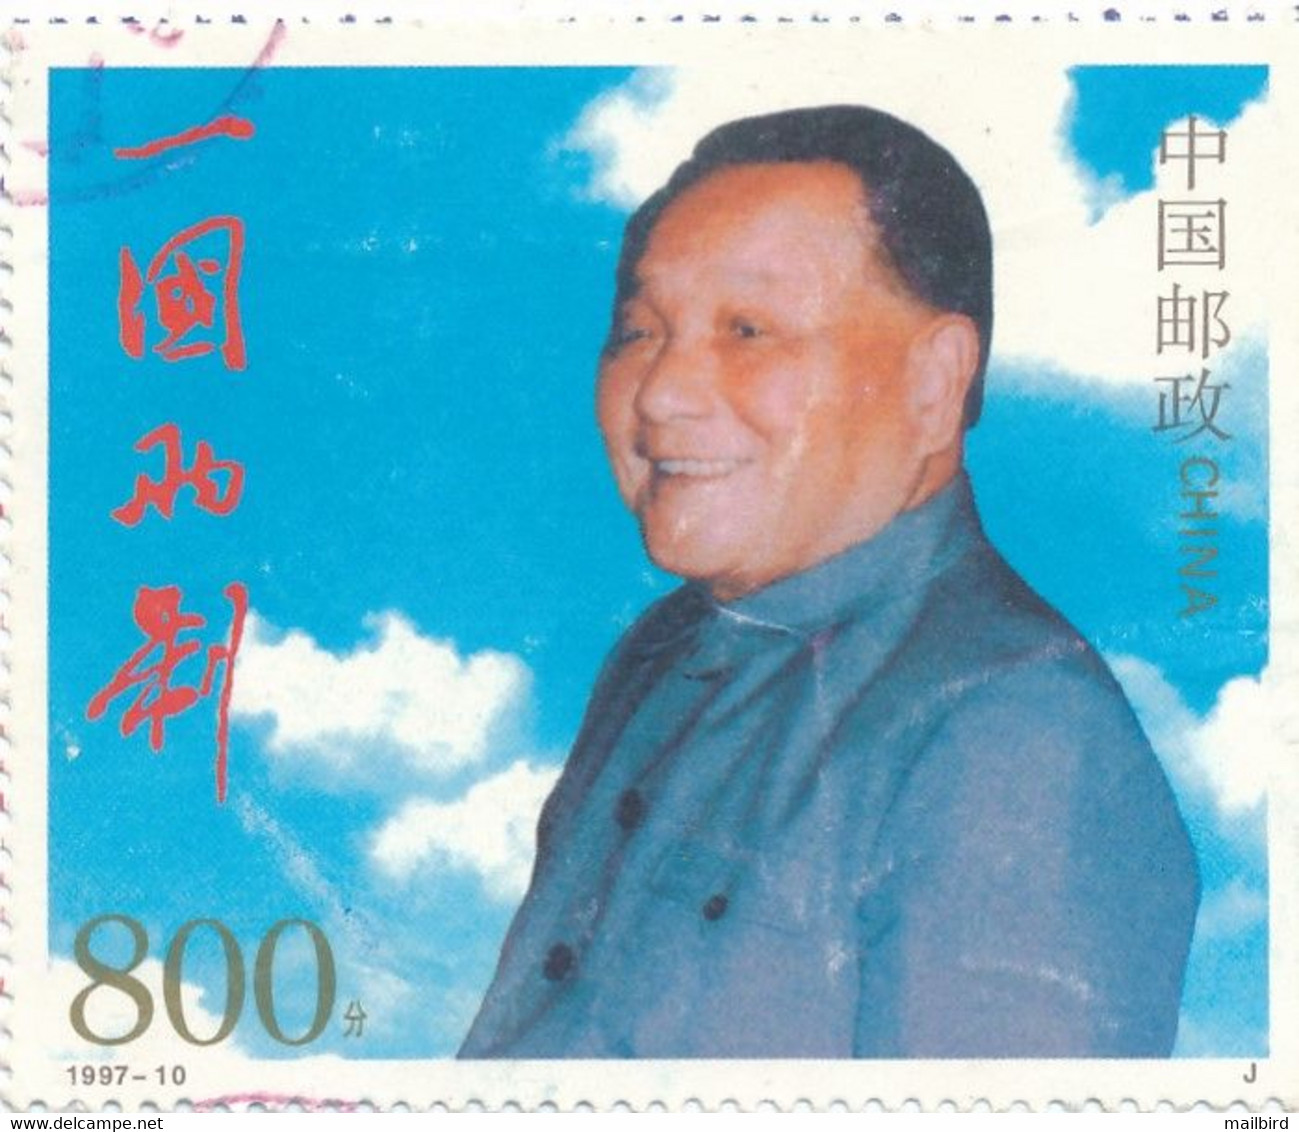 China Peoples Republic Scott No. 2774c Used Year 1997-10 Stamp From Souv. Sheet Postally Used. - Usati